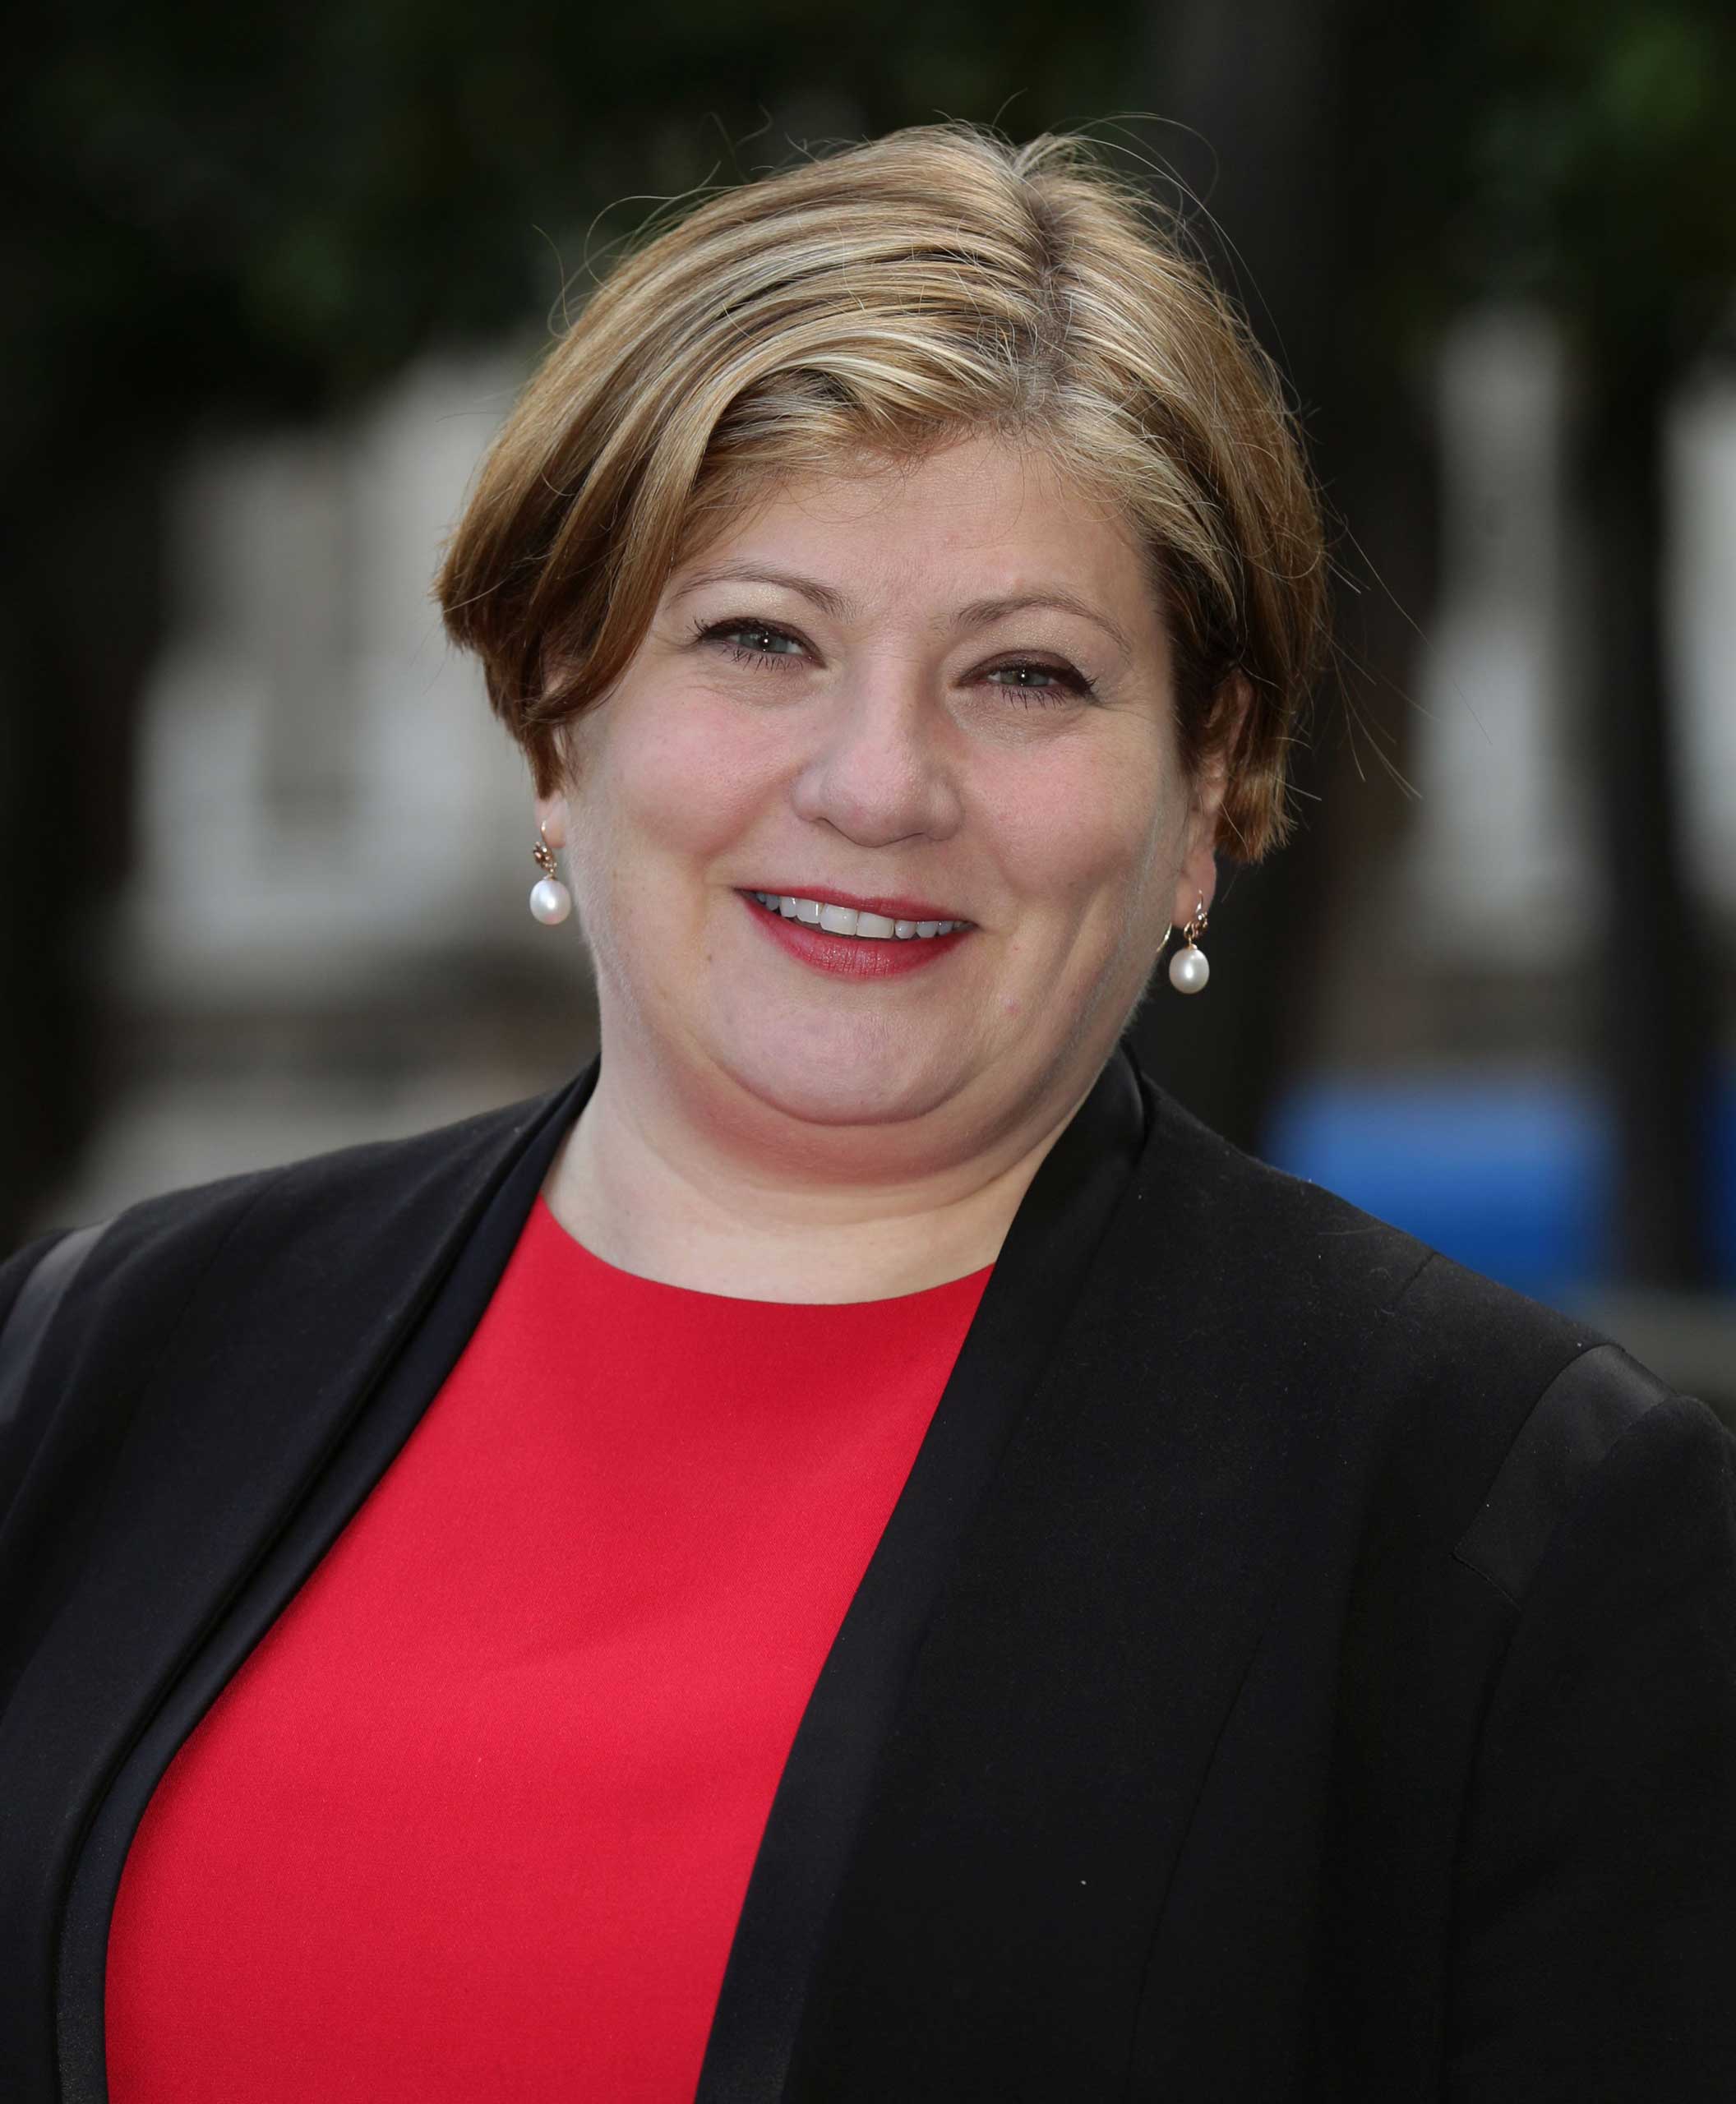 Then-Shadow Attorney General Emily Thornberry in 2013.